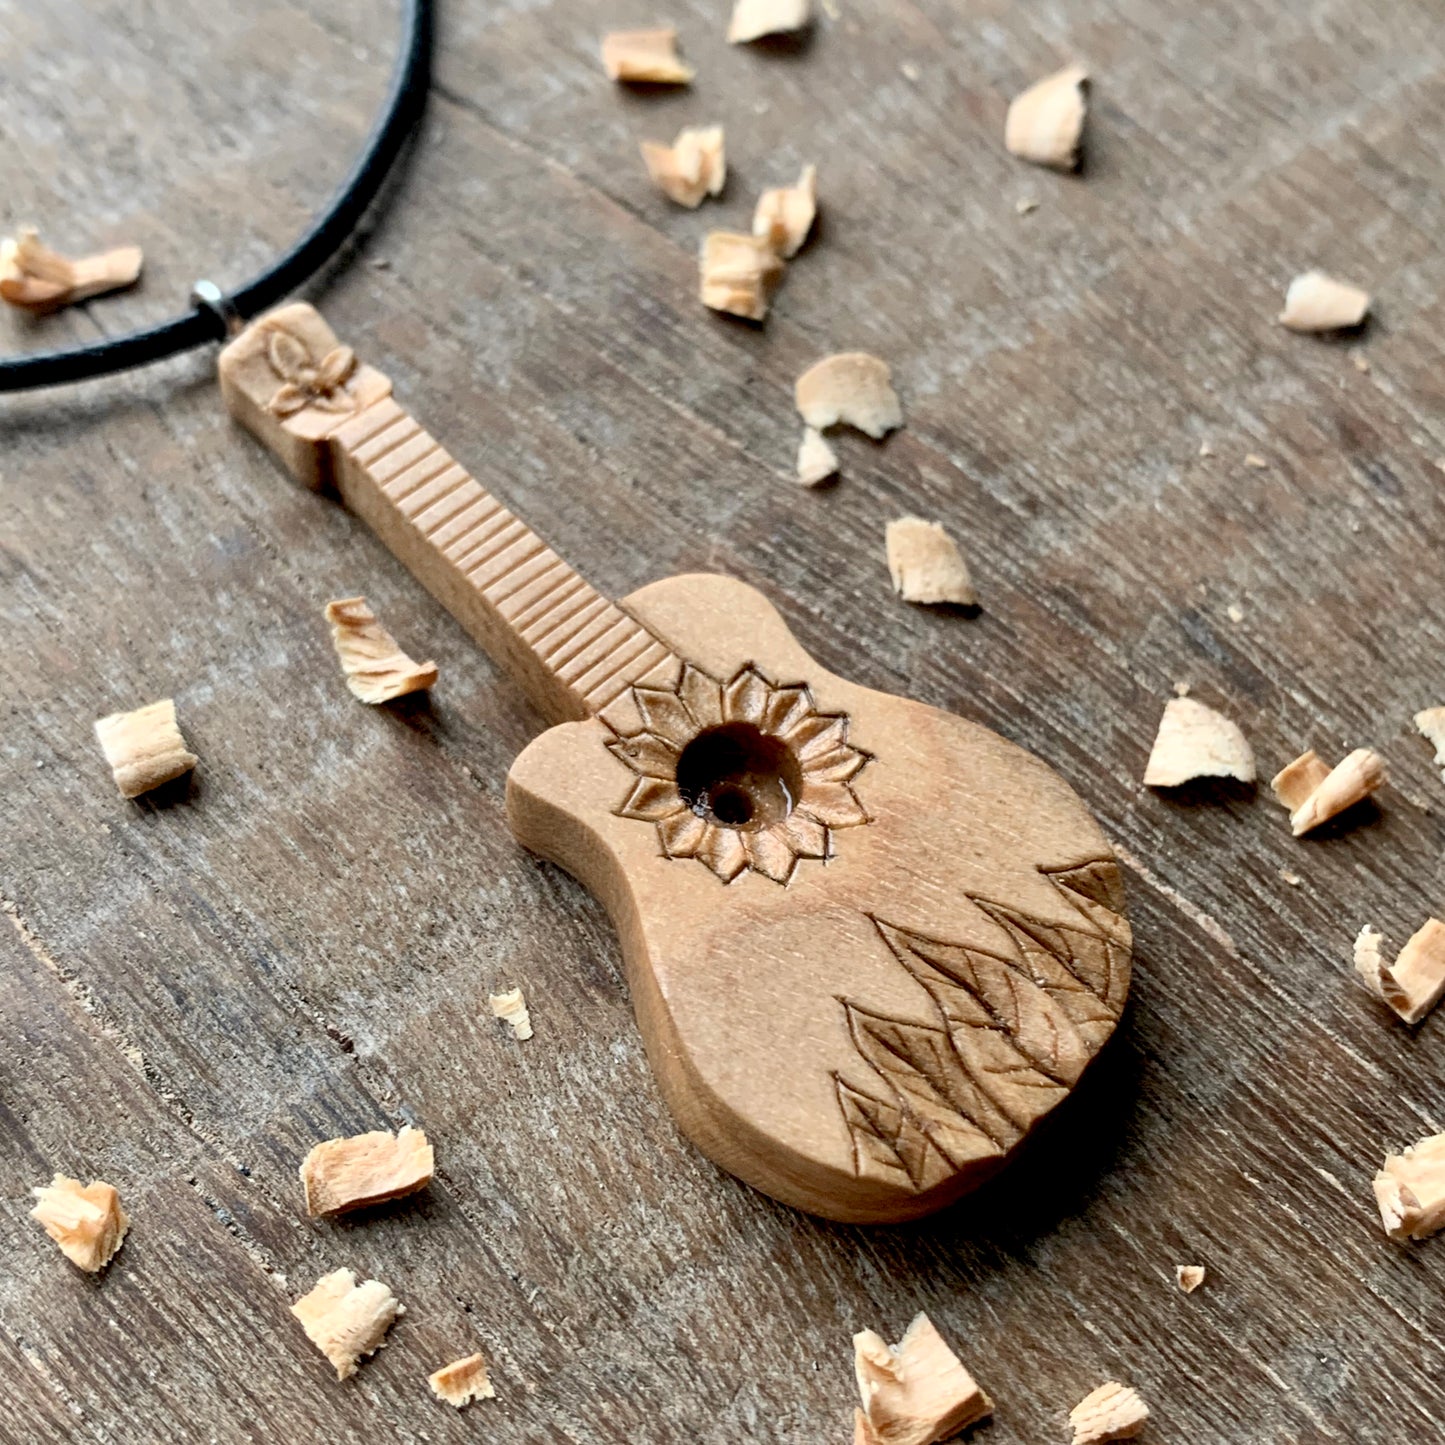 Acoustic Guitar Of Flower And Leaves Design Pendant